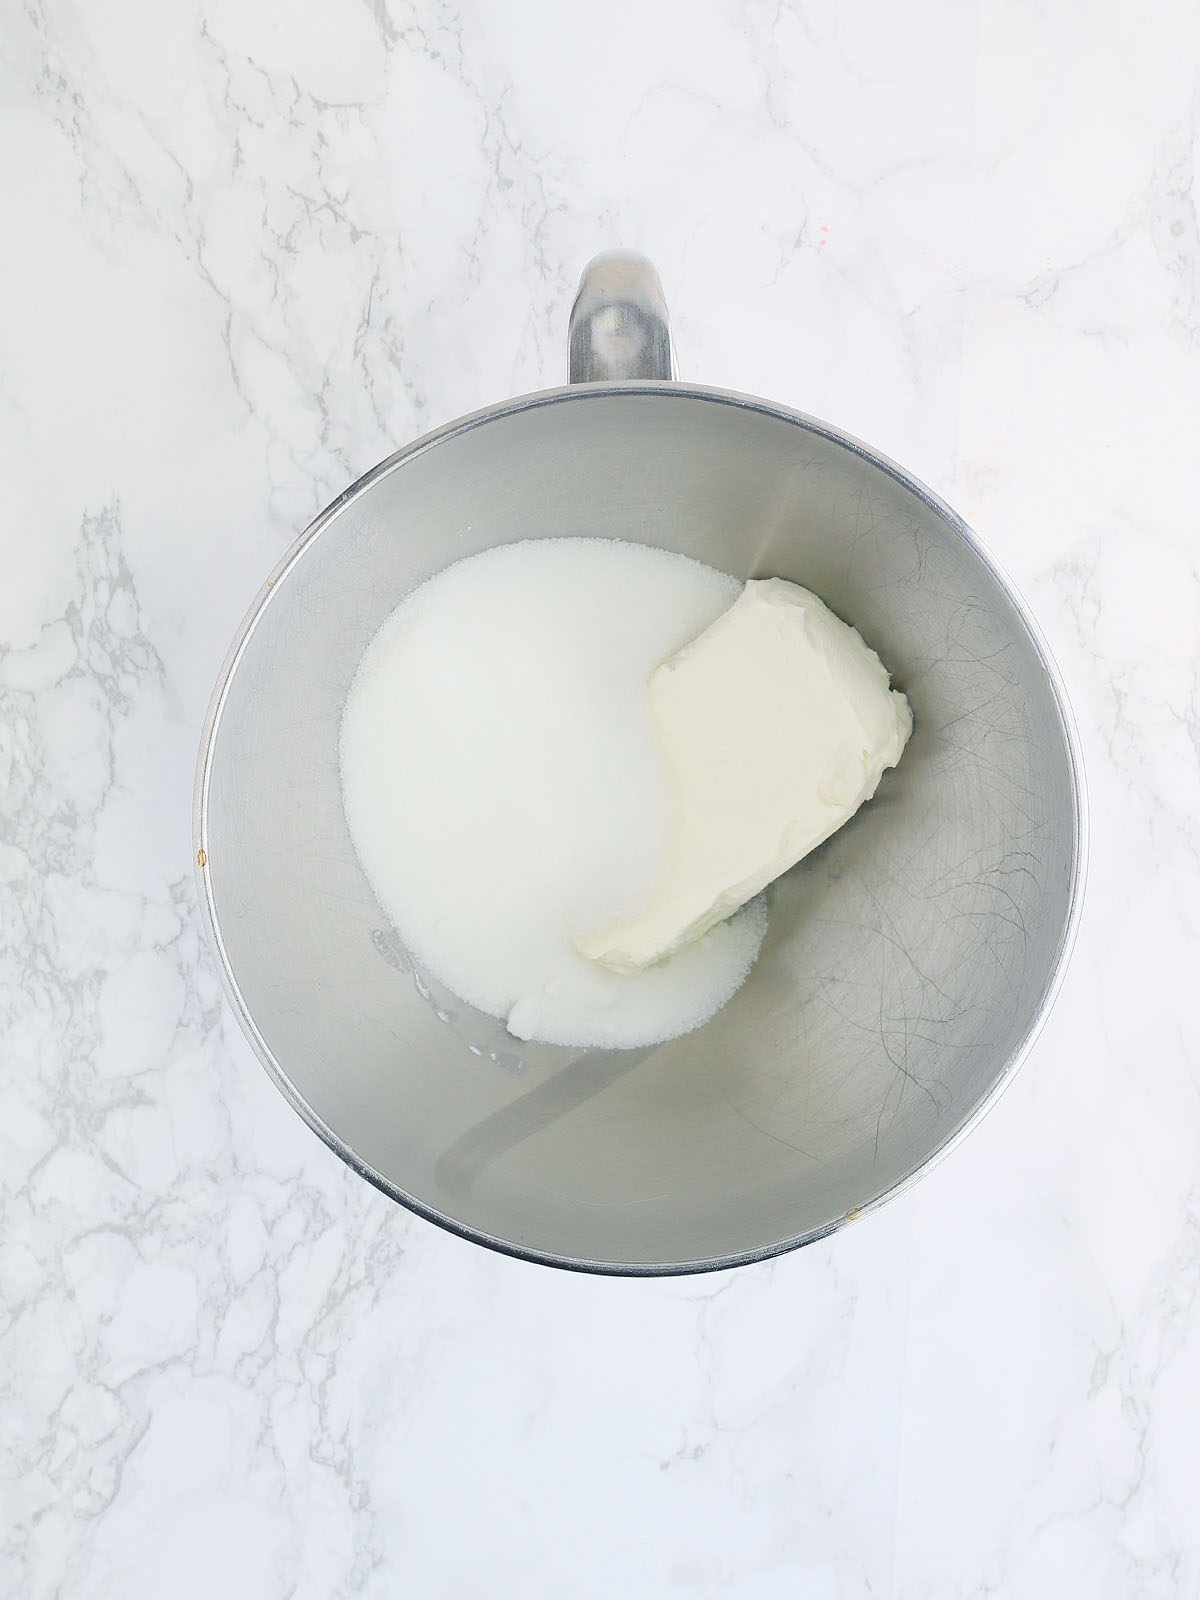 sugar and a block of cream cheese in a metal mixing bowl